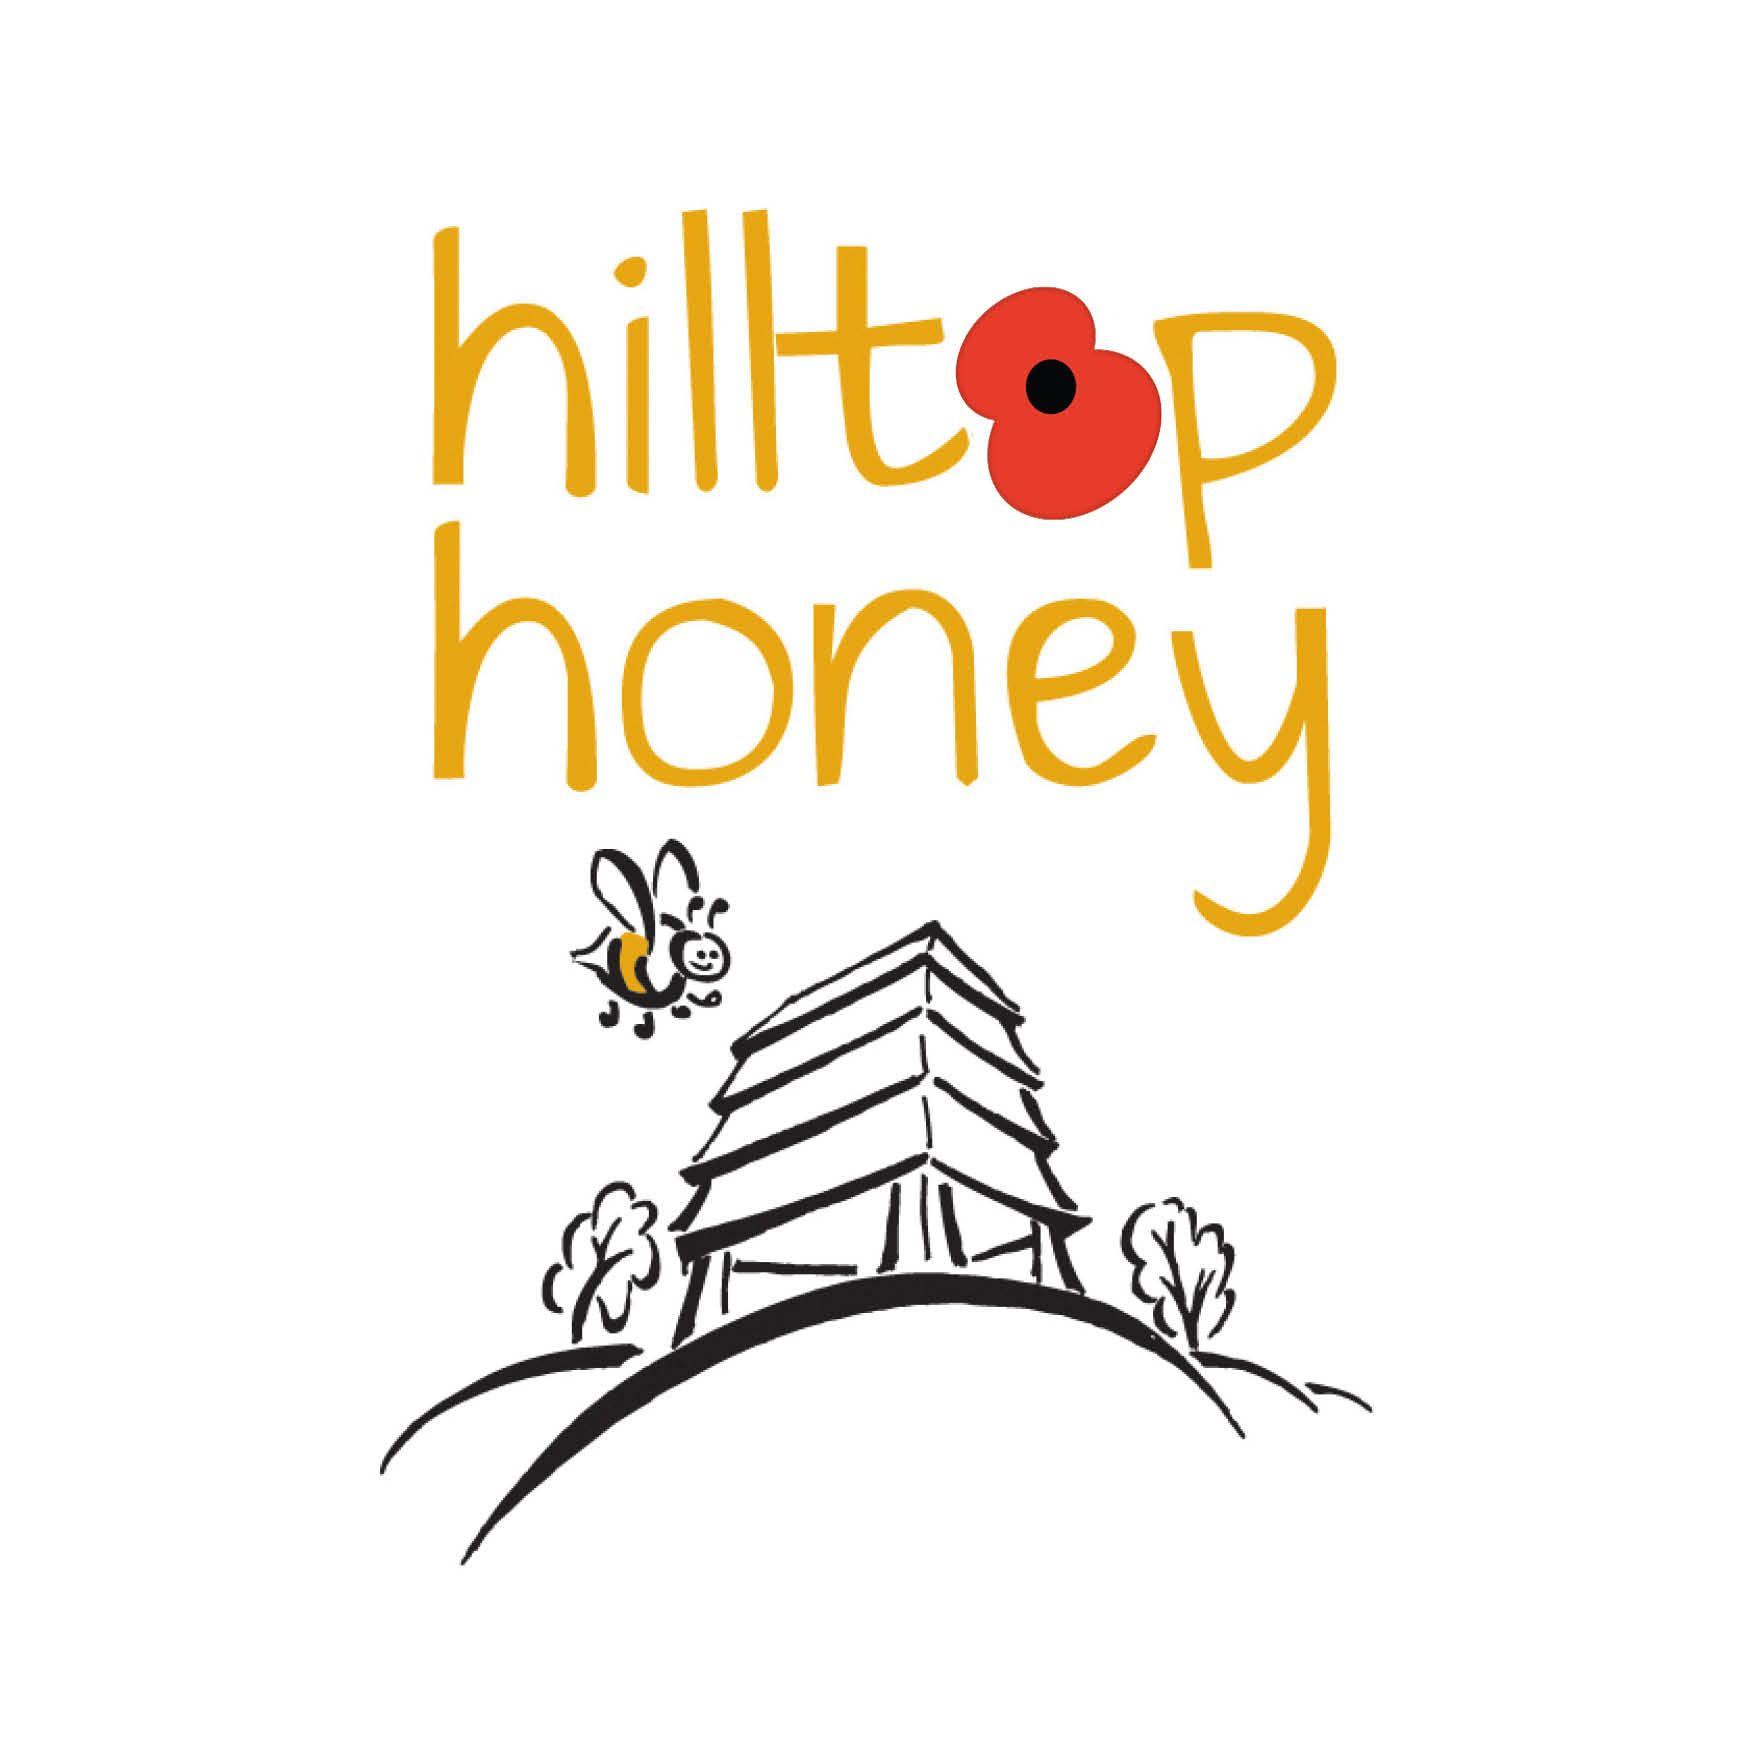 Poppy Appeal Logo - Continued Support For The British Legion's Poppy Appeal – hilltop honey